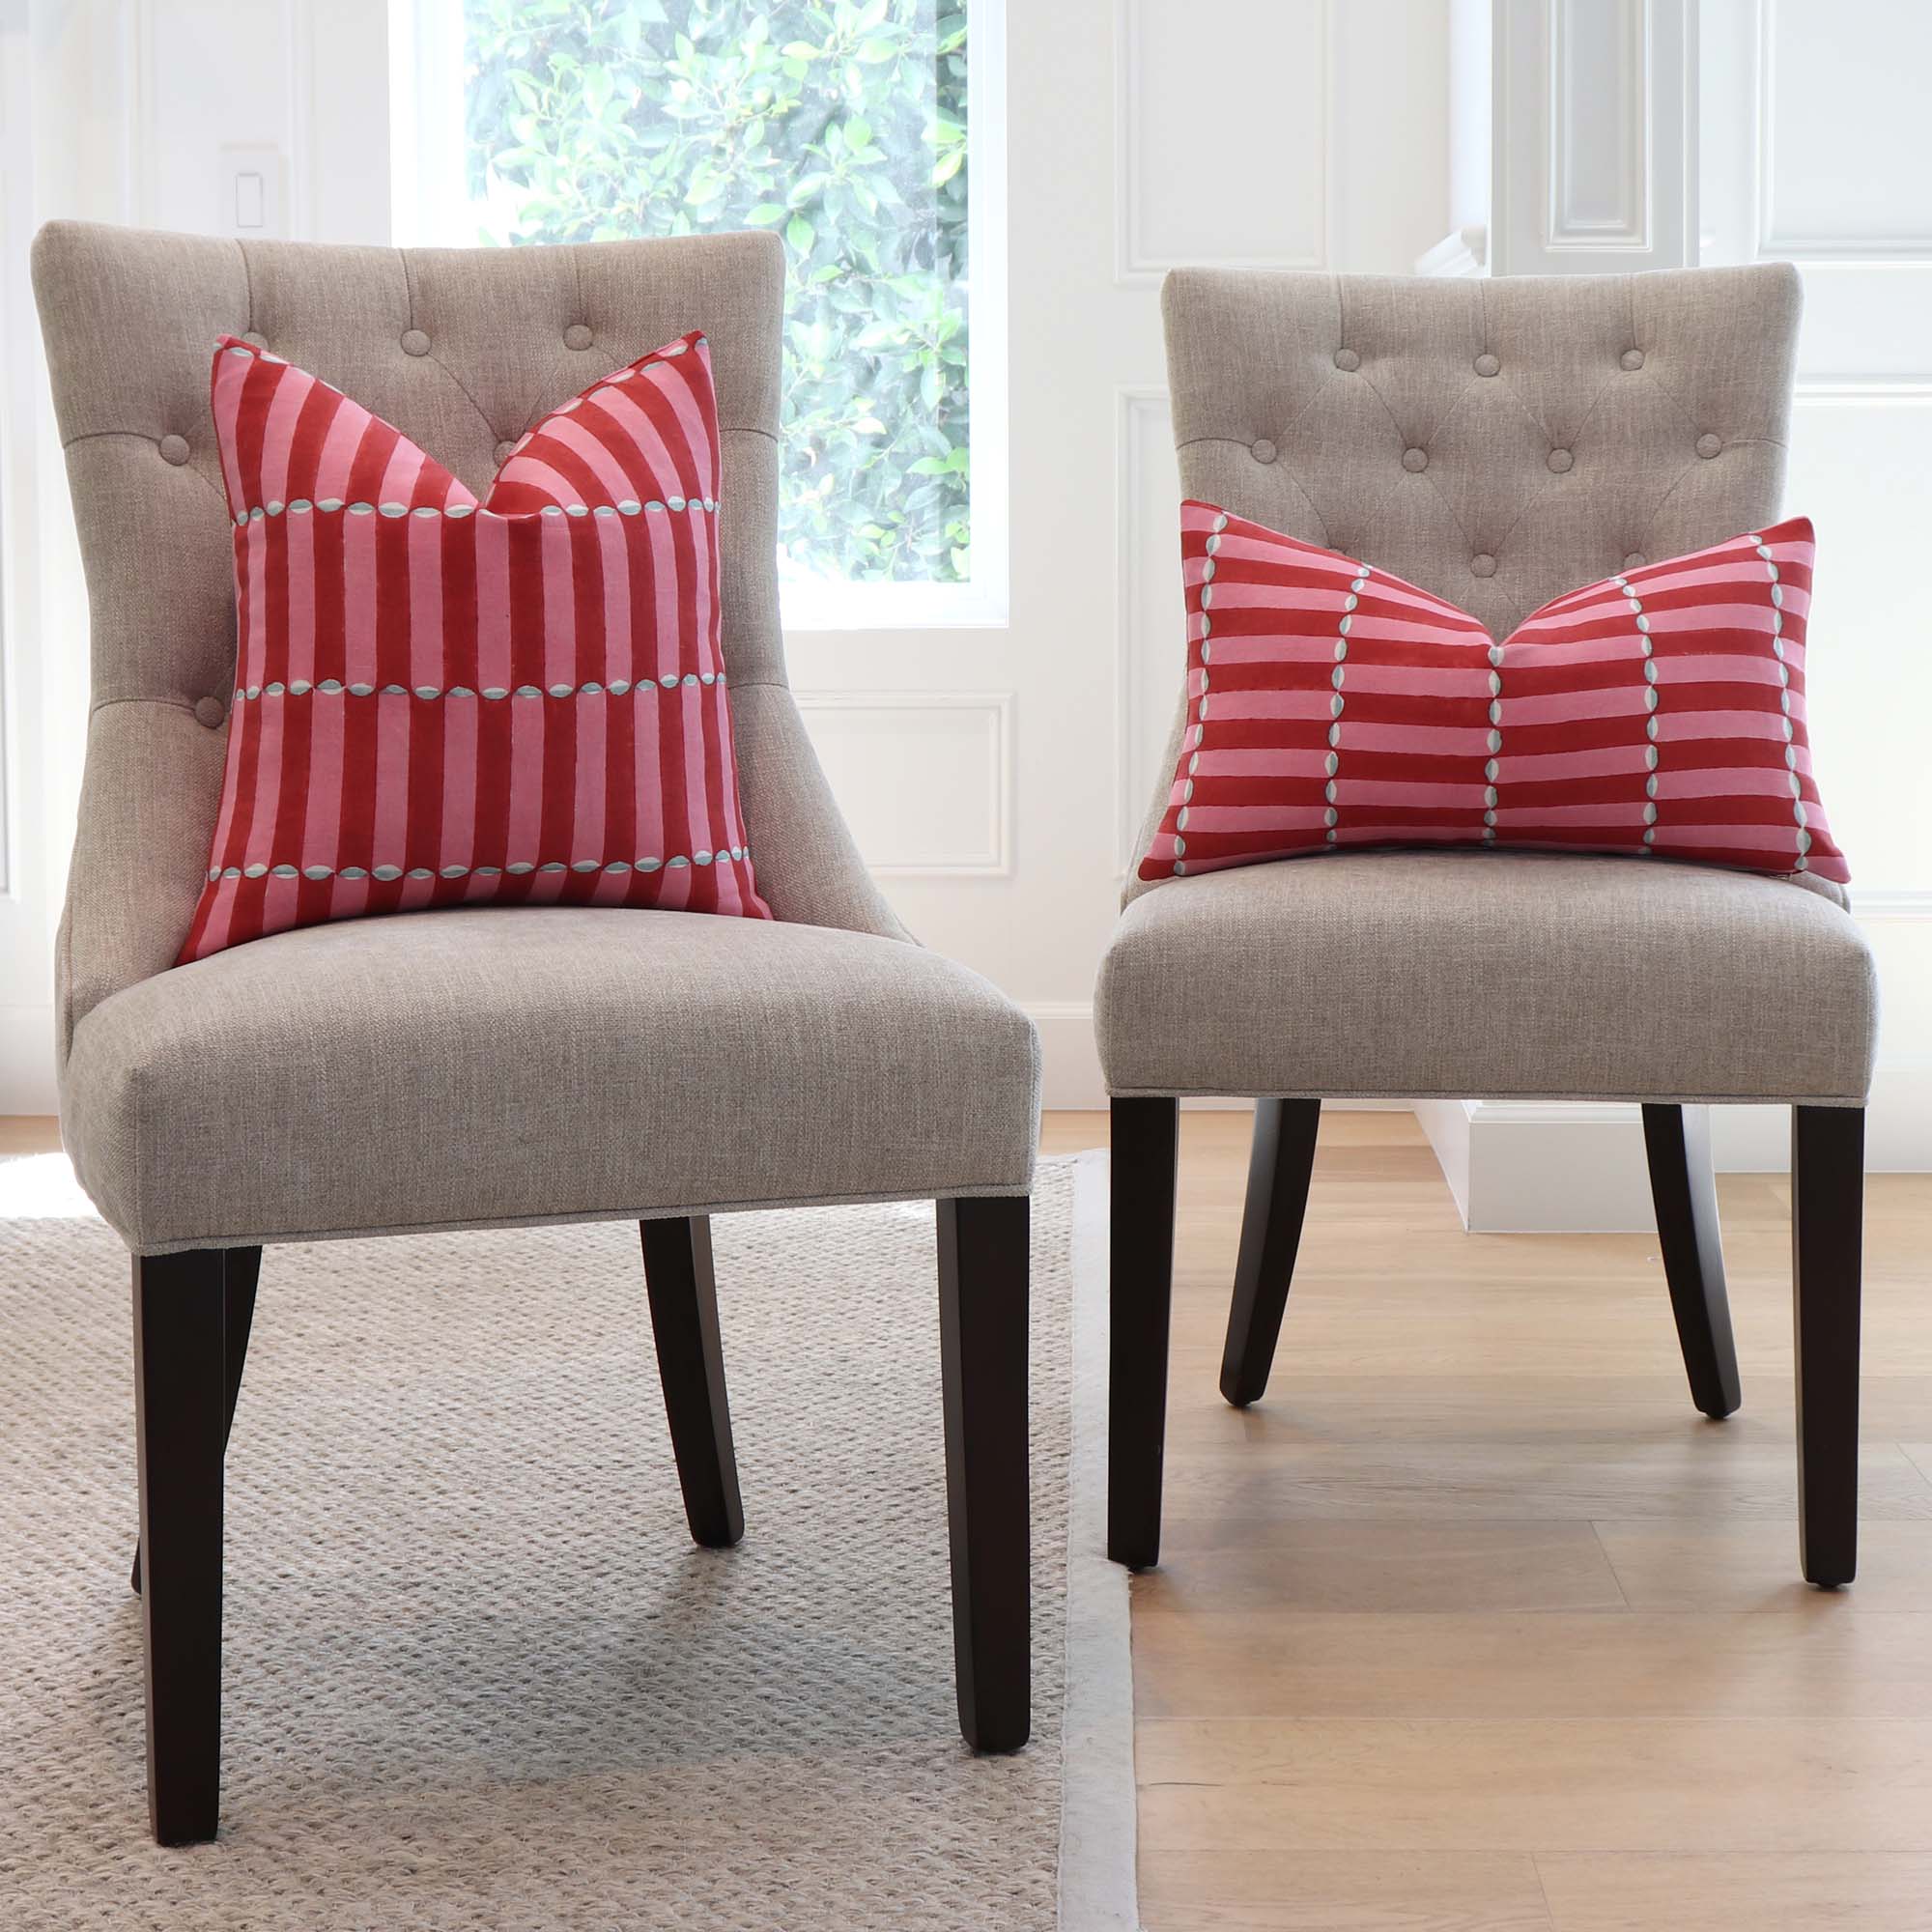 Small Throw Pillows For Chair